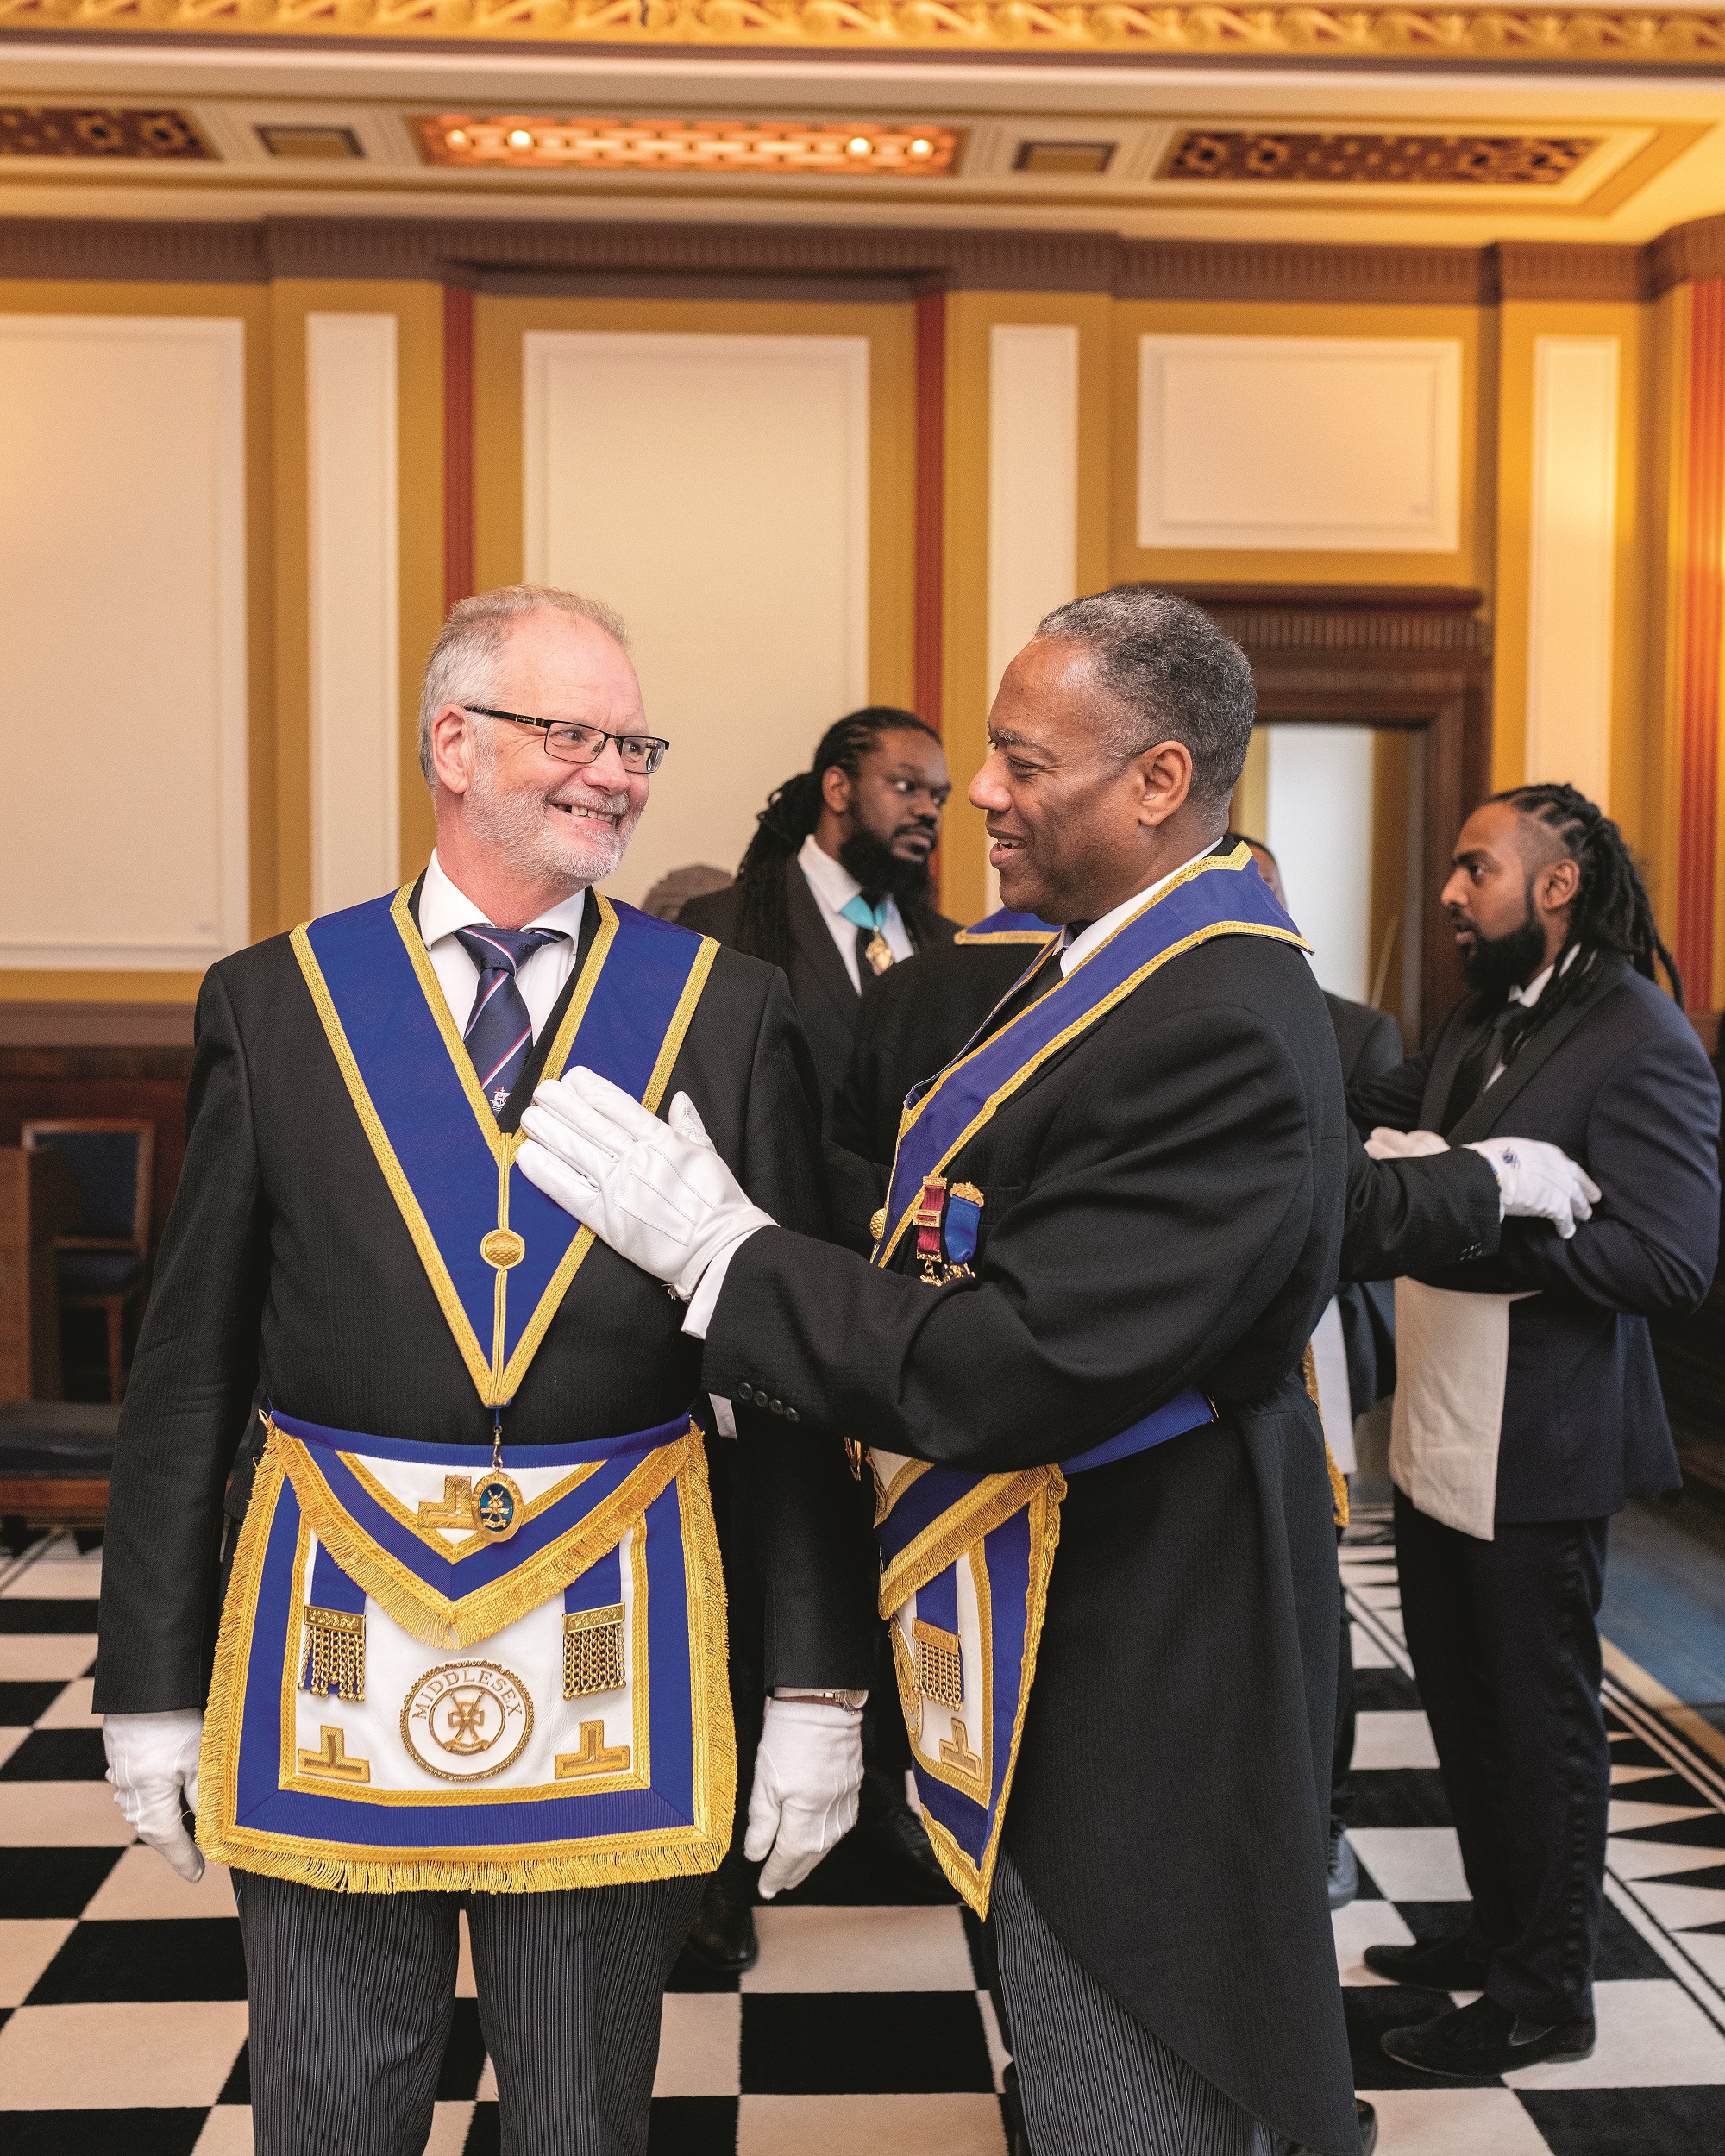 Freemasons smiling with each other in a Lodge room